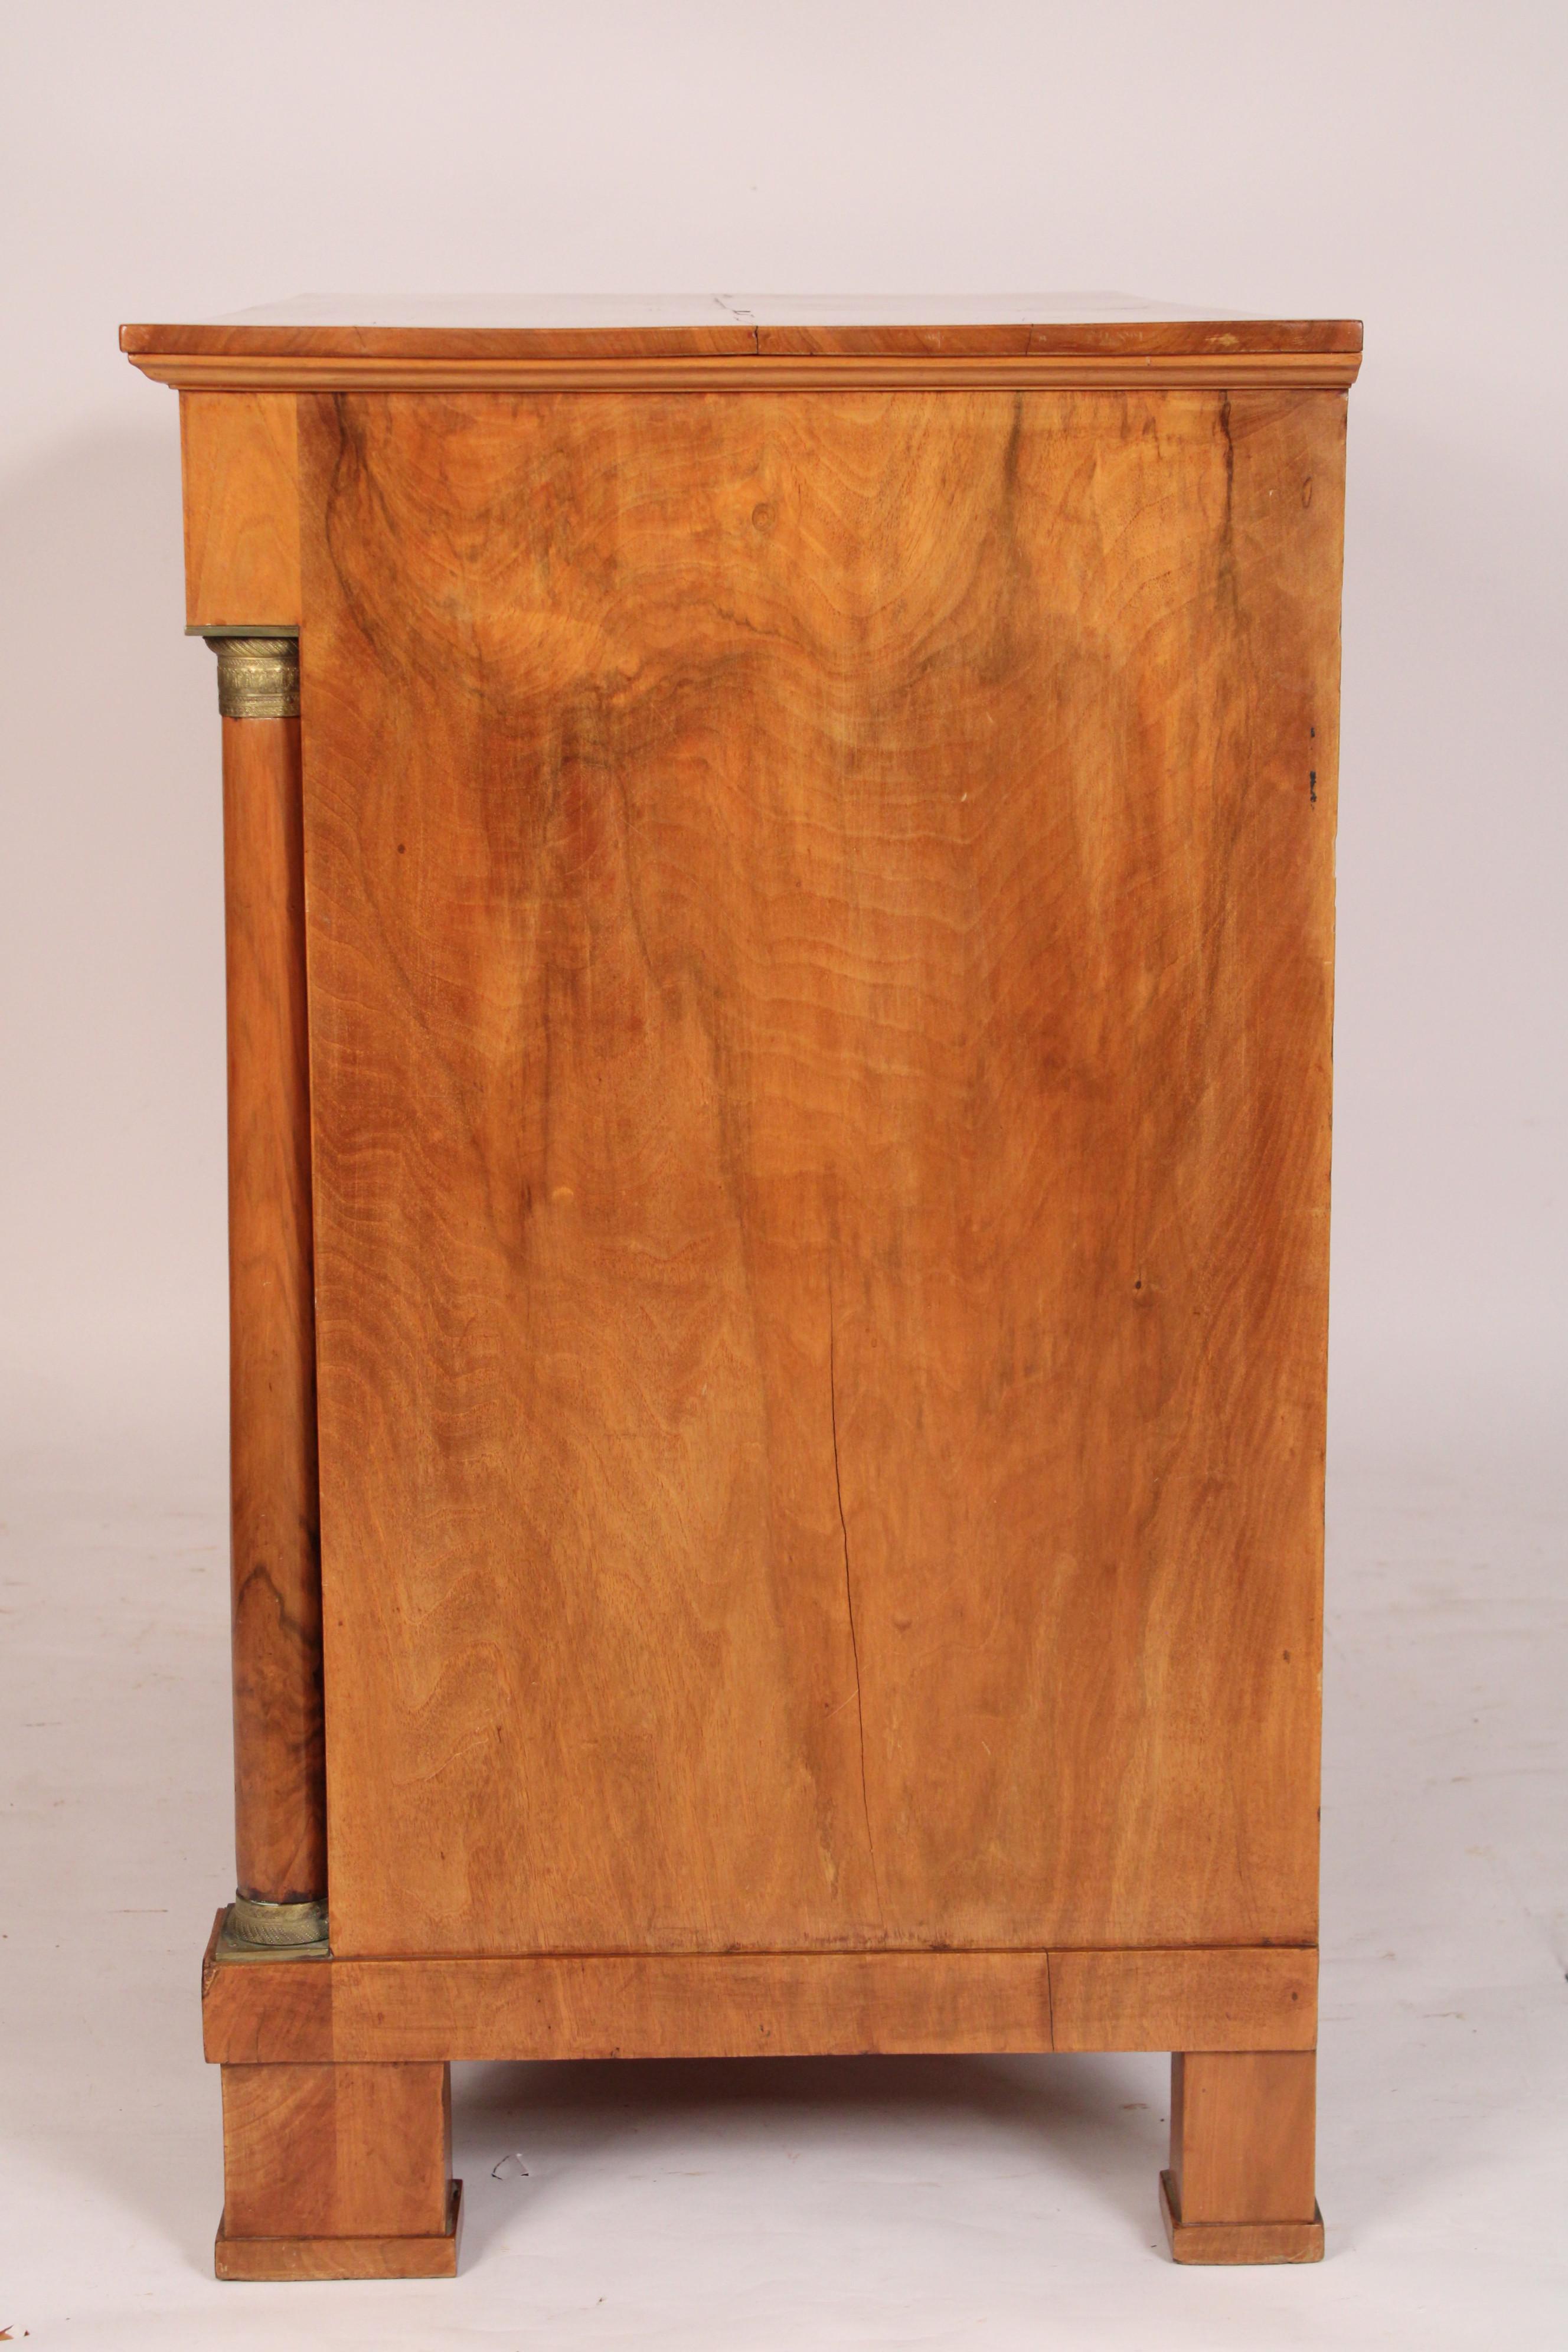 19th Century Antique Empire Style Burl Walnut Chest Of Drawers For Sale